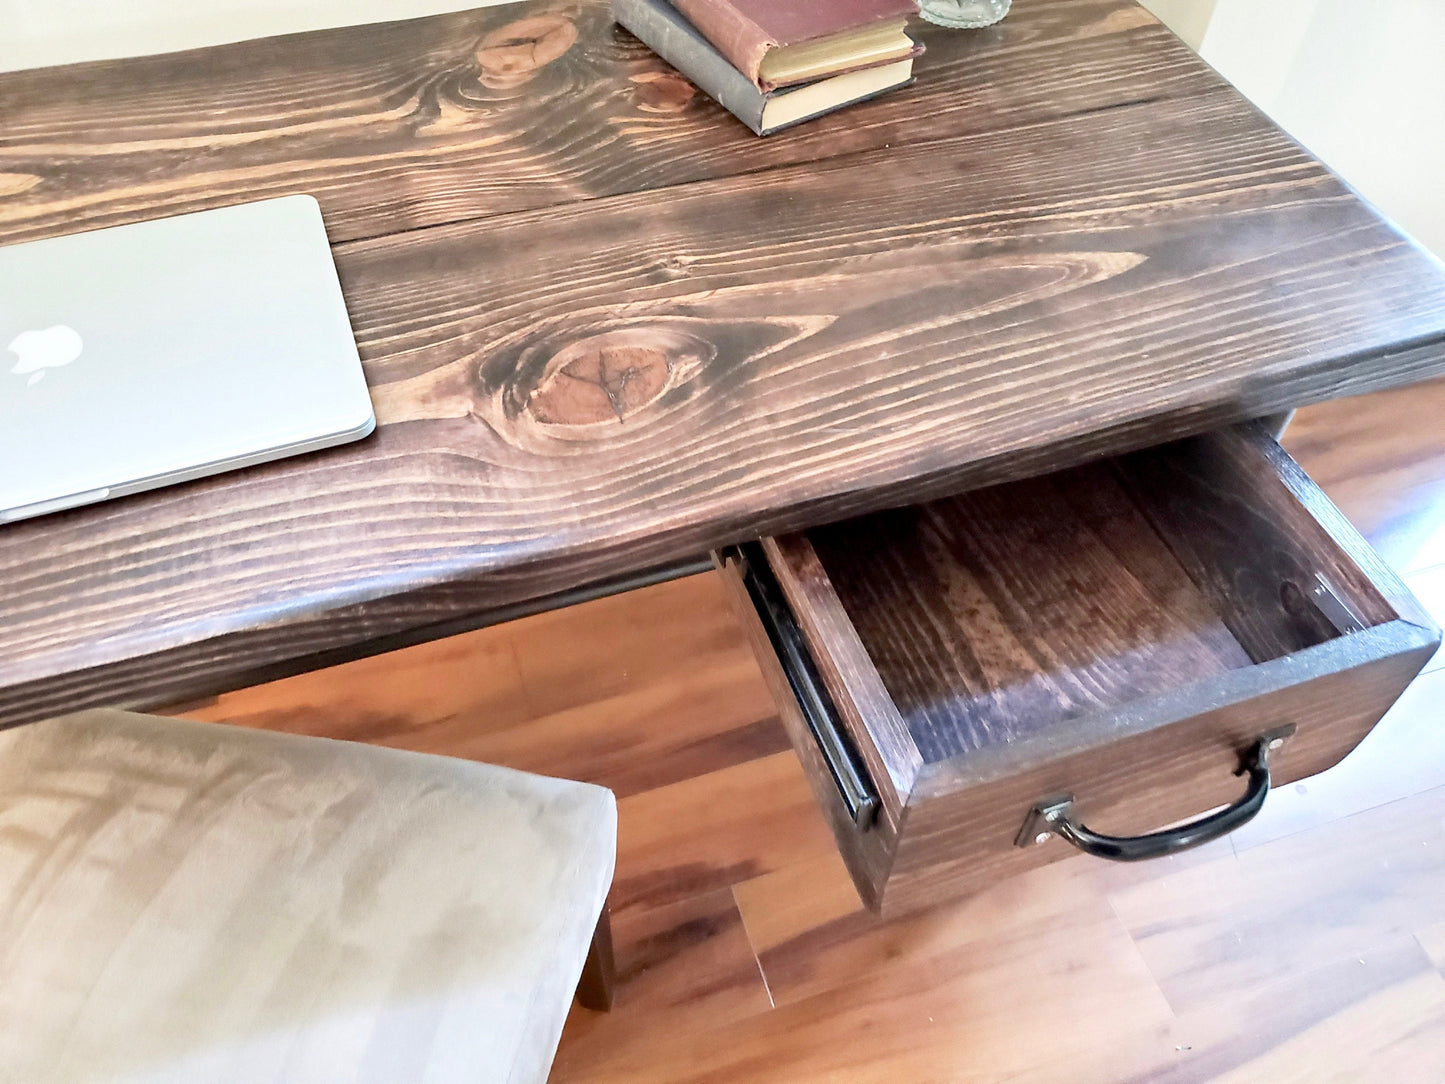 Steel and Wood Desk - Office Iron Pipe Desk with Drawer, Keyboard Tray, Home Office Furniture, Rustic Industrial Style